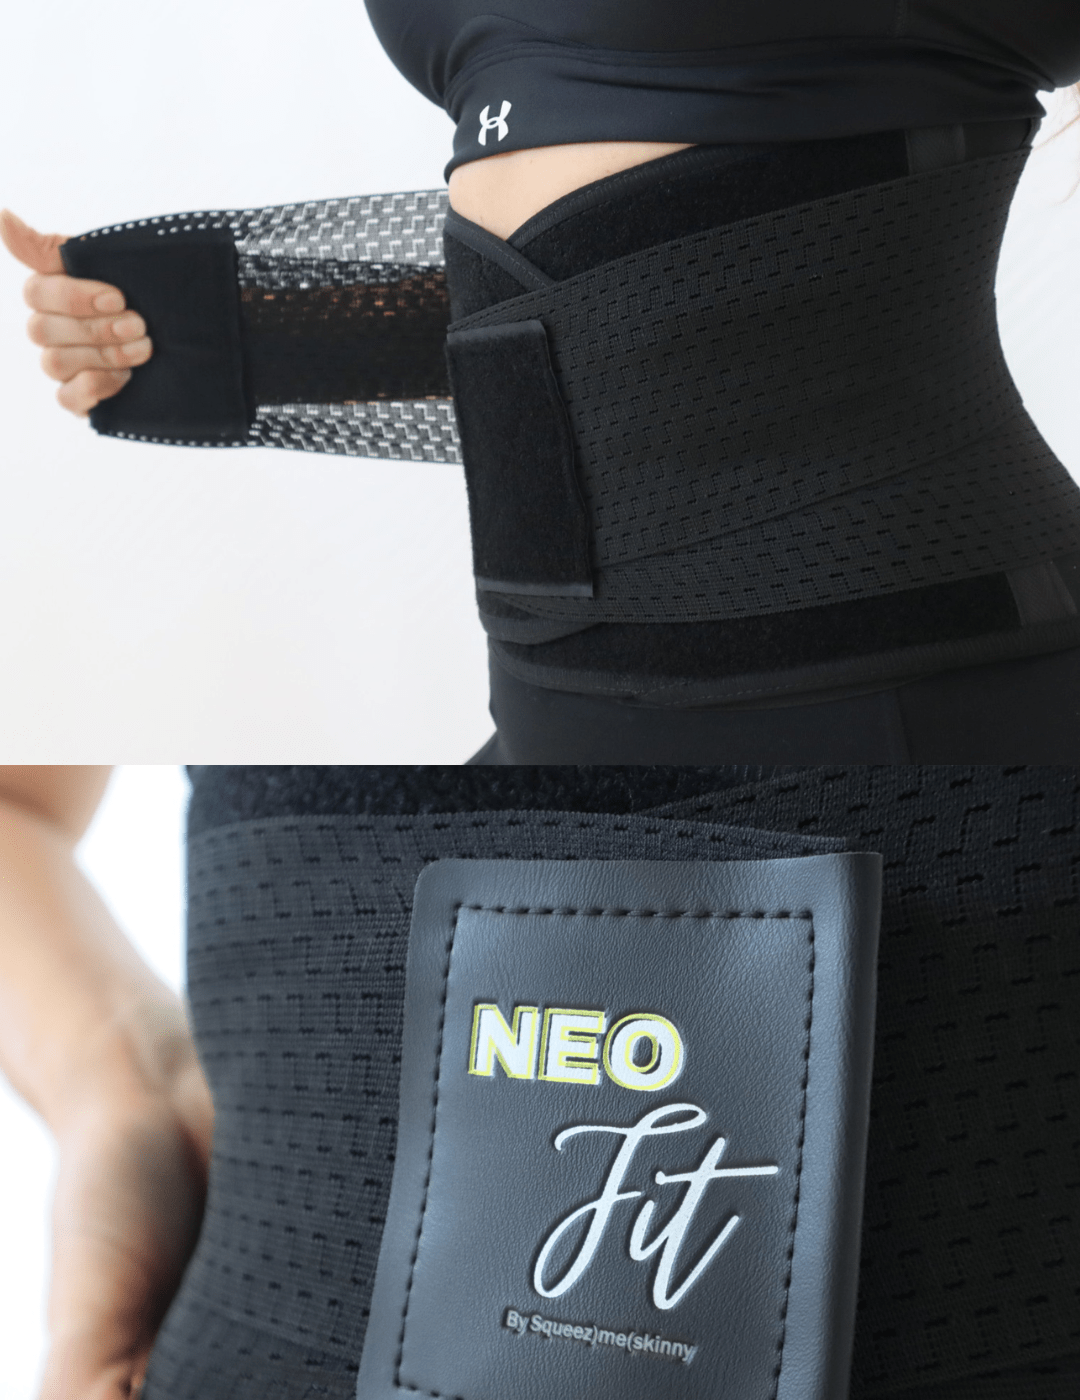 NeoFit Workout Sweat Belt  Squeez Me Skinny's Best Exercise Belt